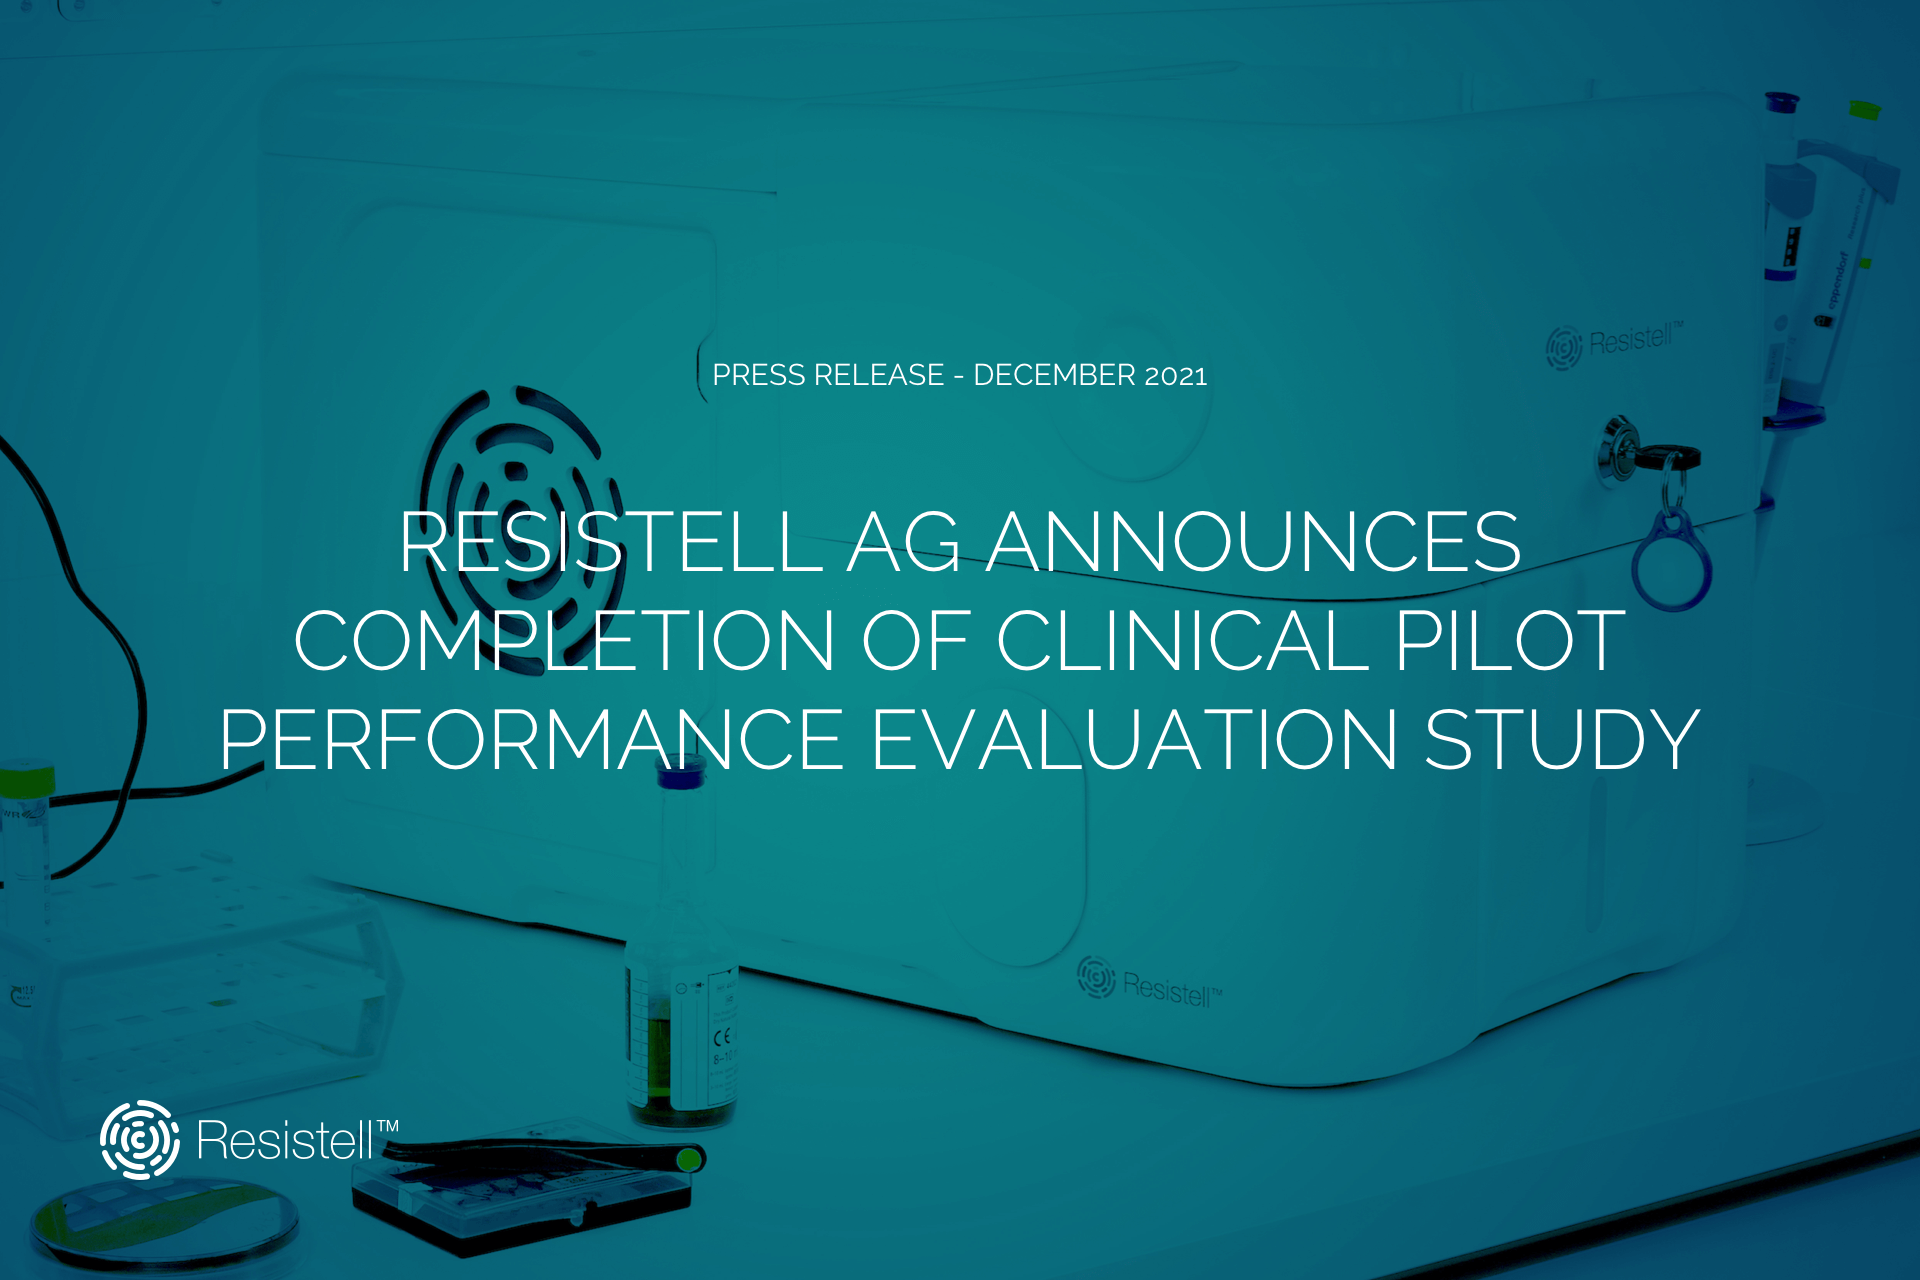 Resistell announces completion of clinical pilot performance evaluation study